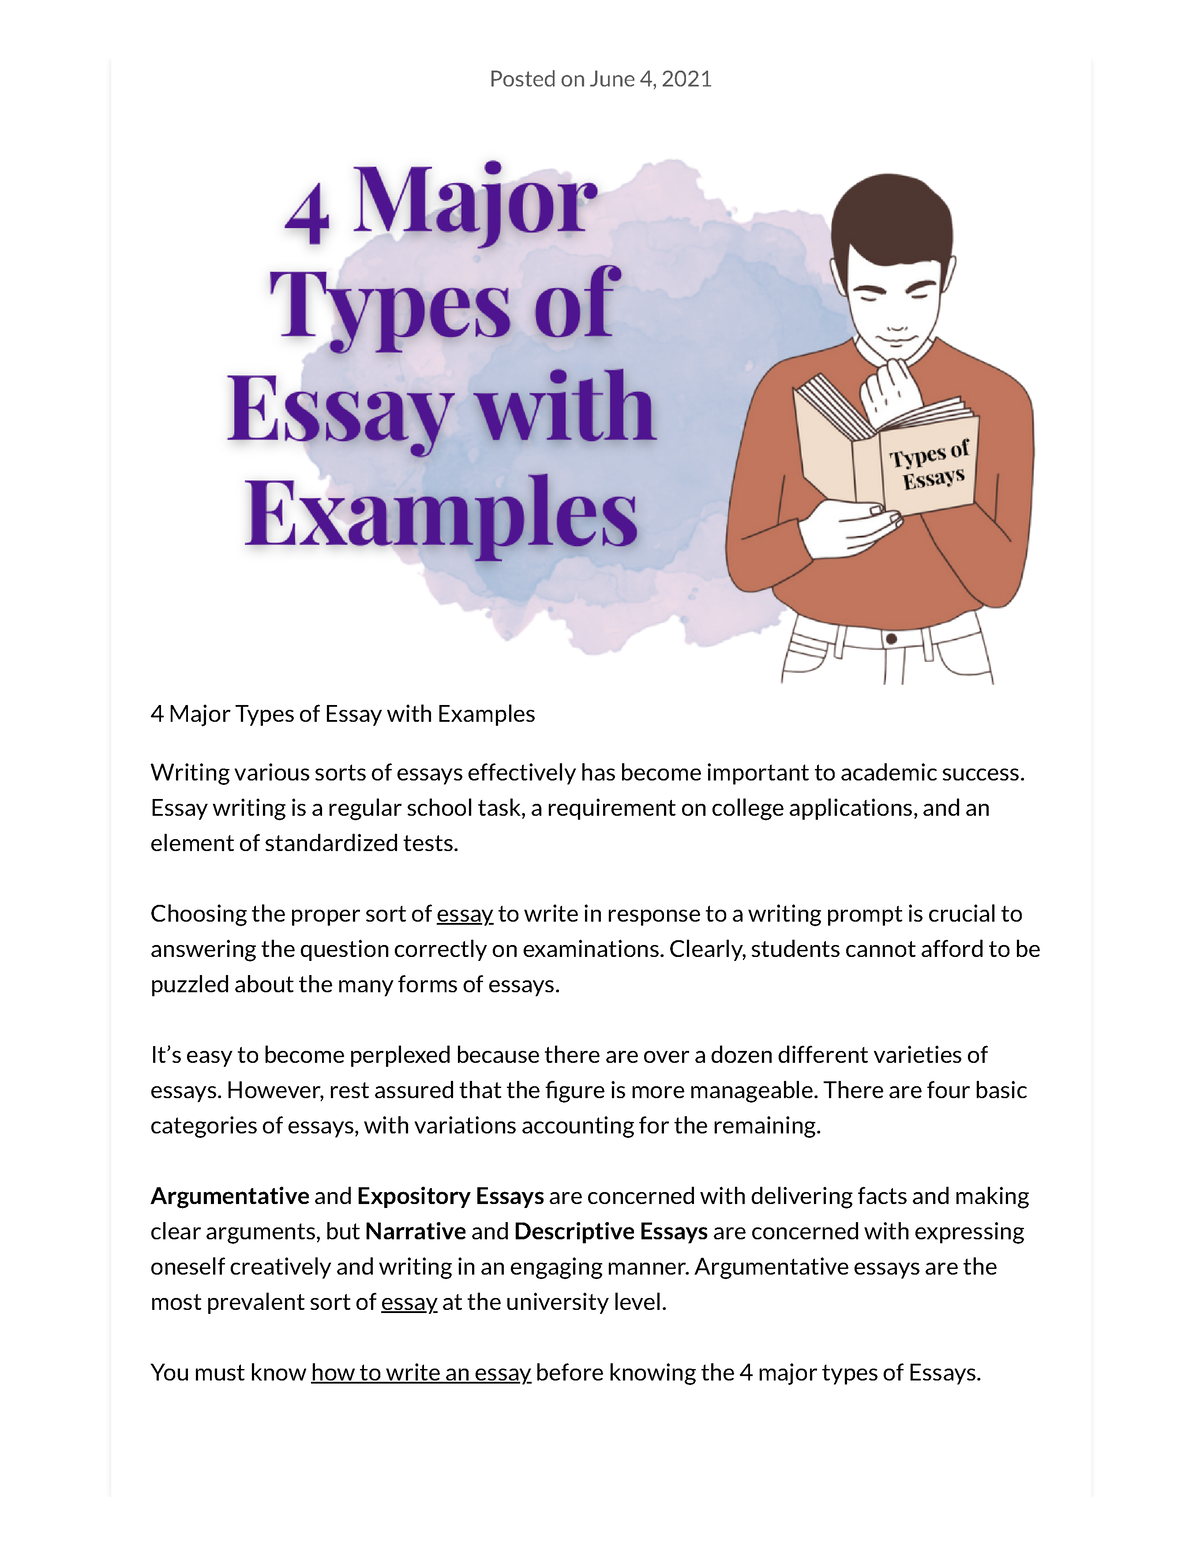 state 4 types of essay